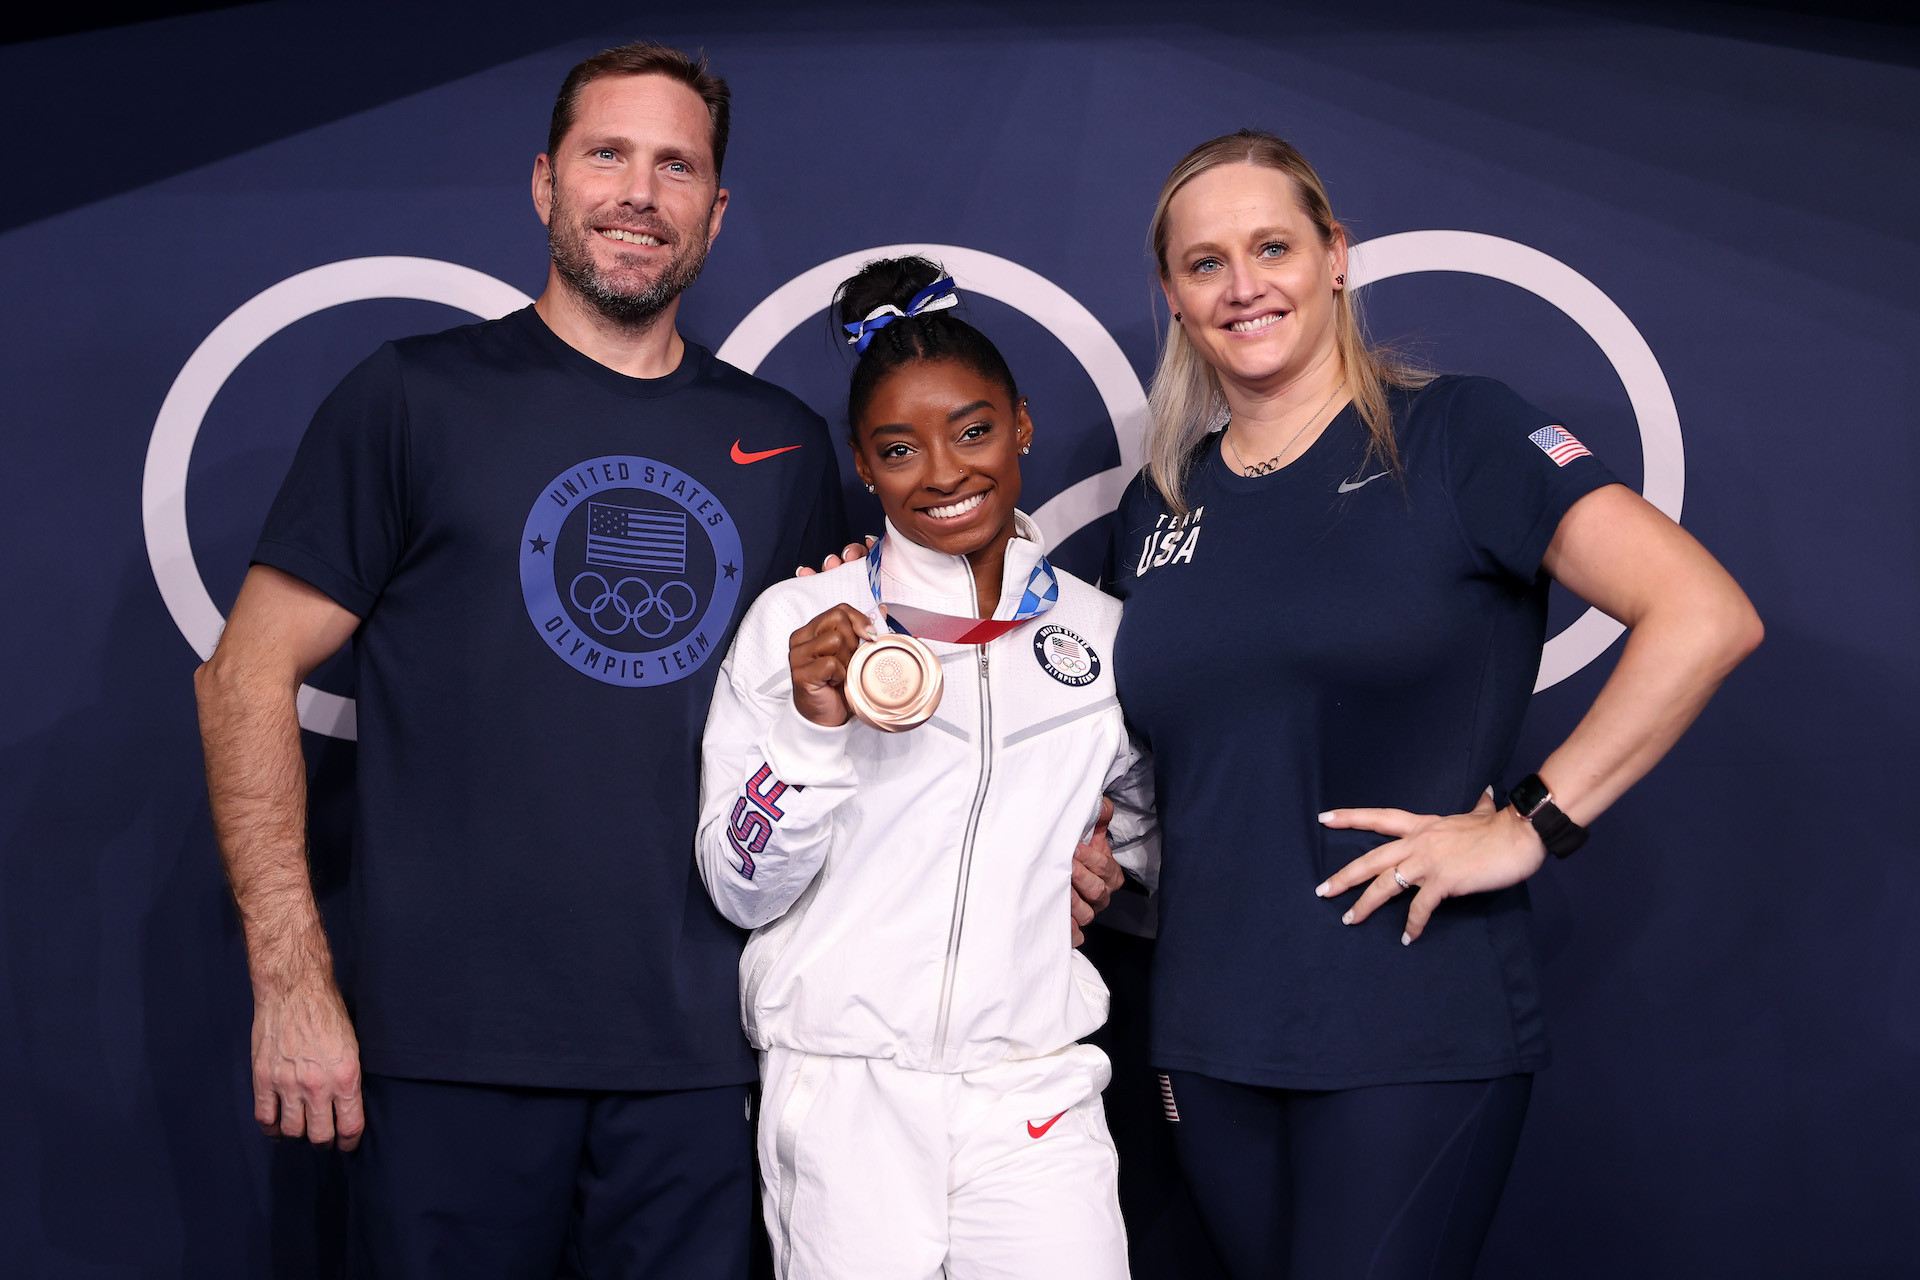 Cecile Canqueteau-Landi poses with bronze medalist Simone Biles and husband and co-coach Laurent Landi. GETTY IMAGES